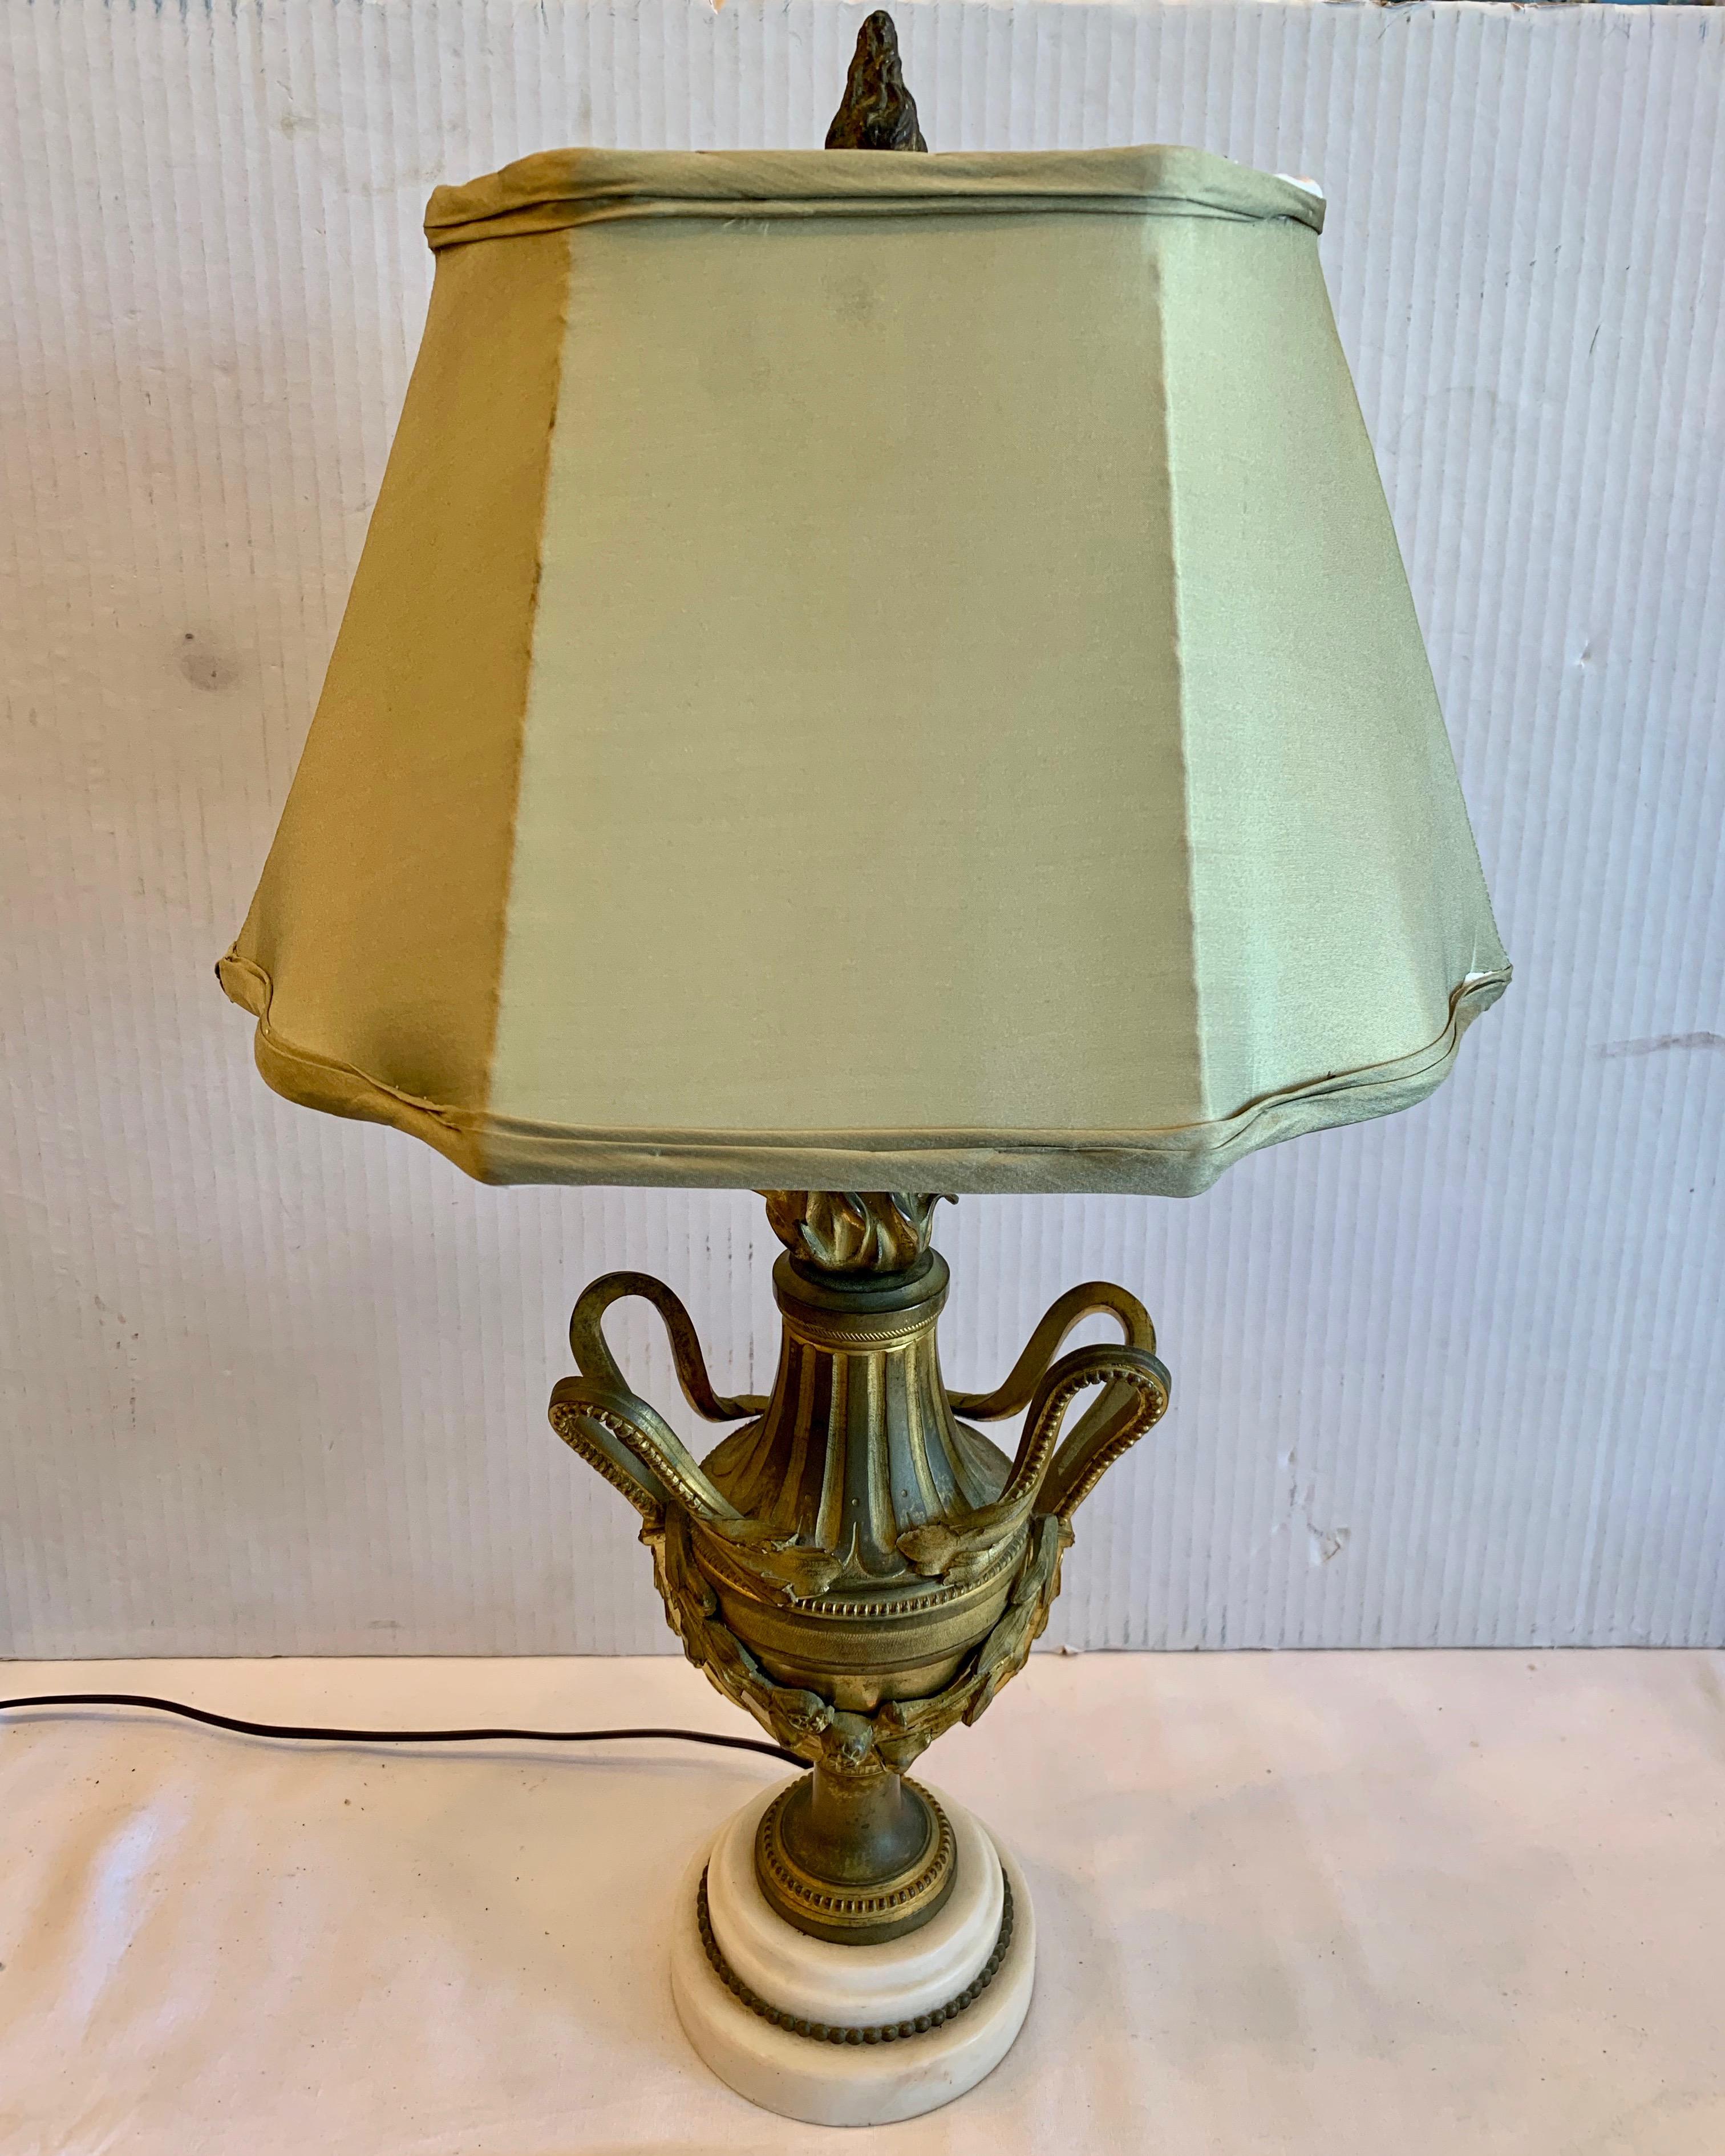 A fine bronze urn with a stepped up marble base, now electrified.
An excellent desk top or night stand, or accent piece . The urn with marble
base is 12